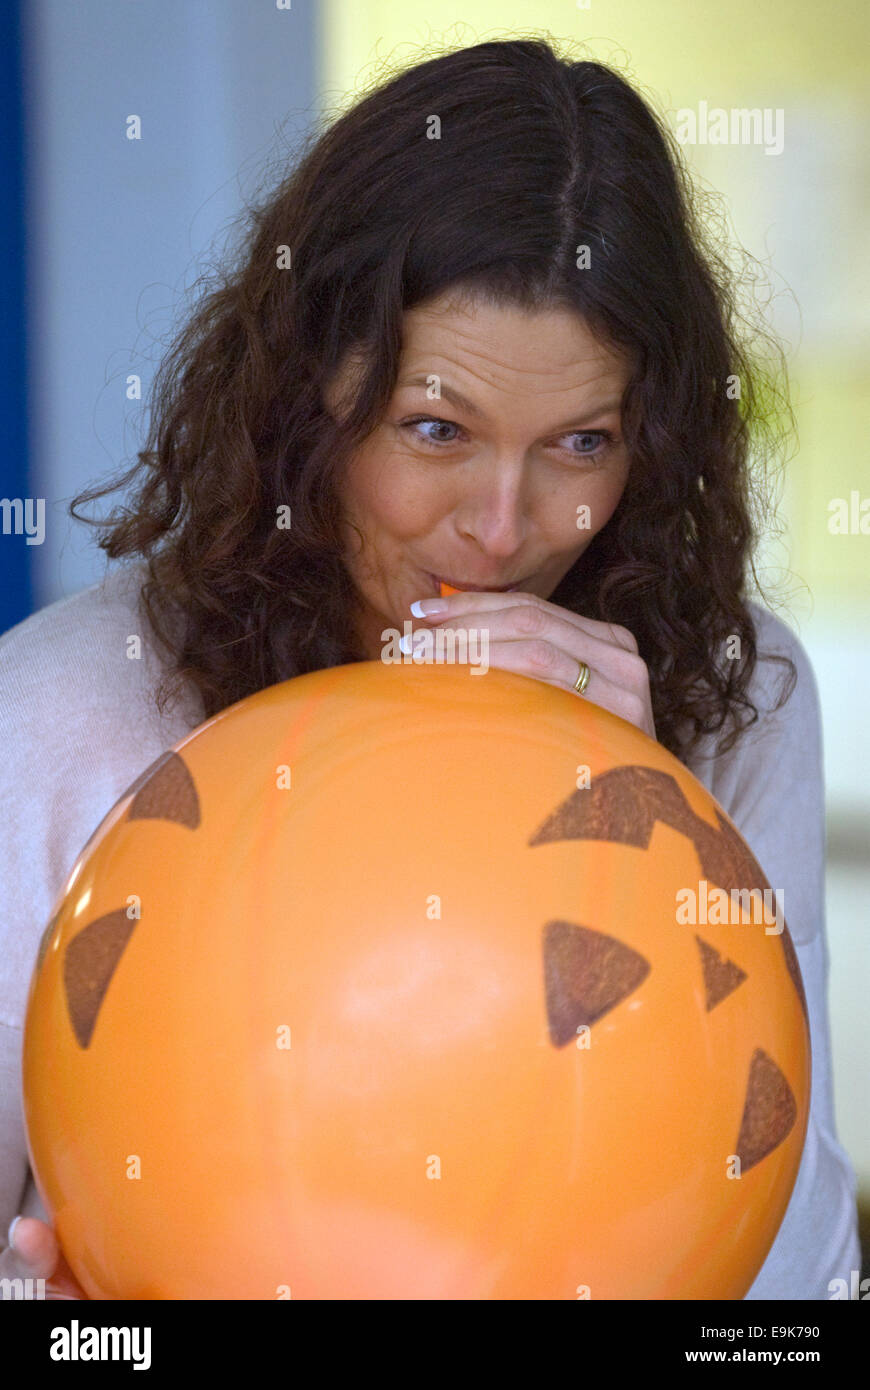 Woman blowing up a balloon for Liphook Carnival, October 25, 2014, Liphook, Hampshire, UK. Stock Photo